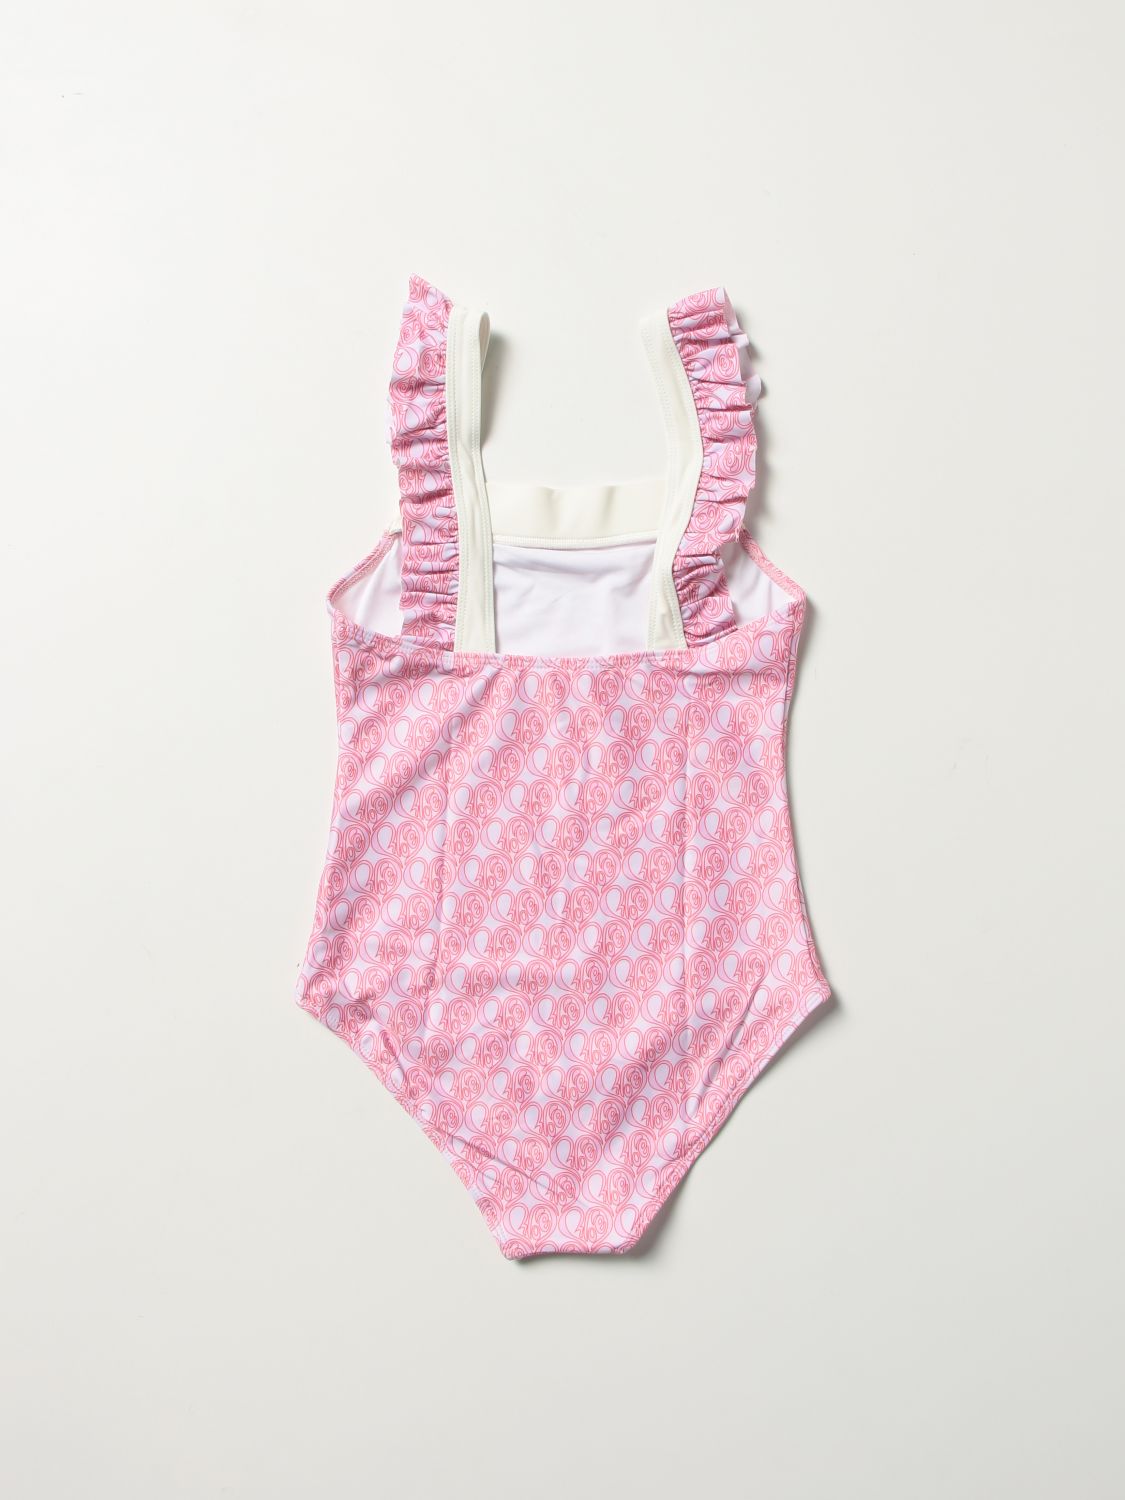 CHLOÉ: Swimsuit kids ChloÉ | Swimsuit Chloé Kids Red | Swimsuit Chloé ...